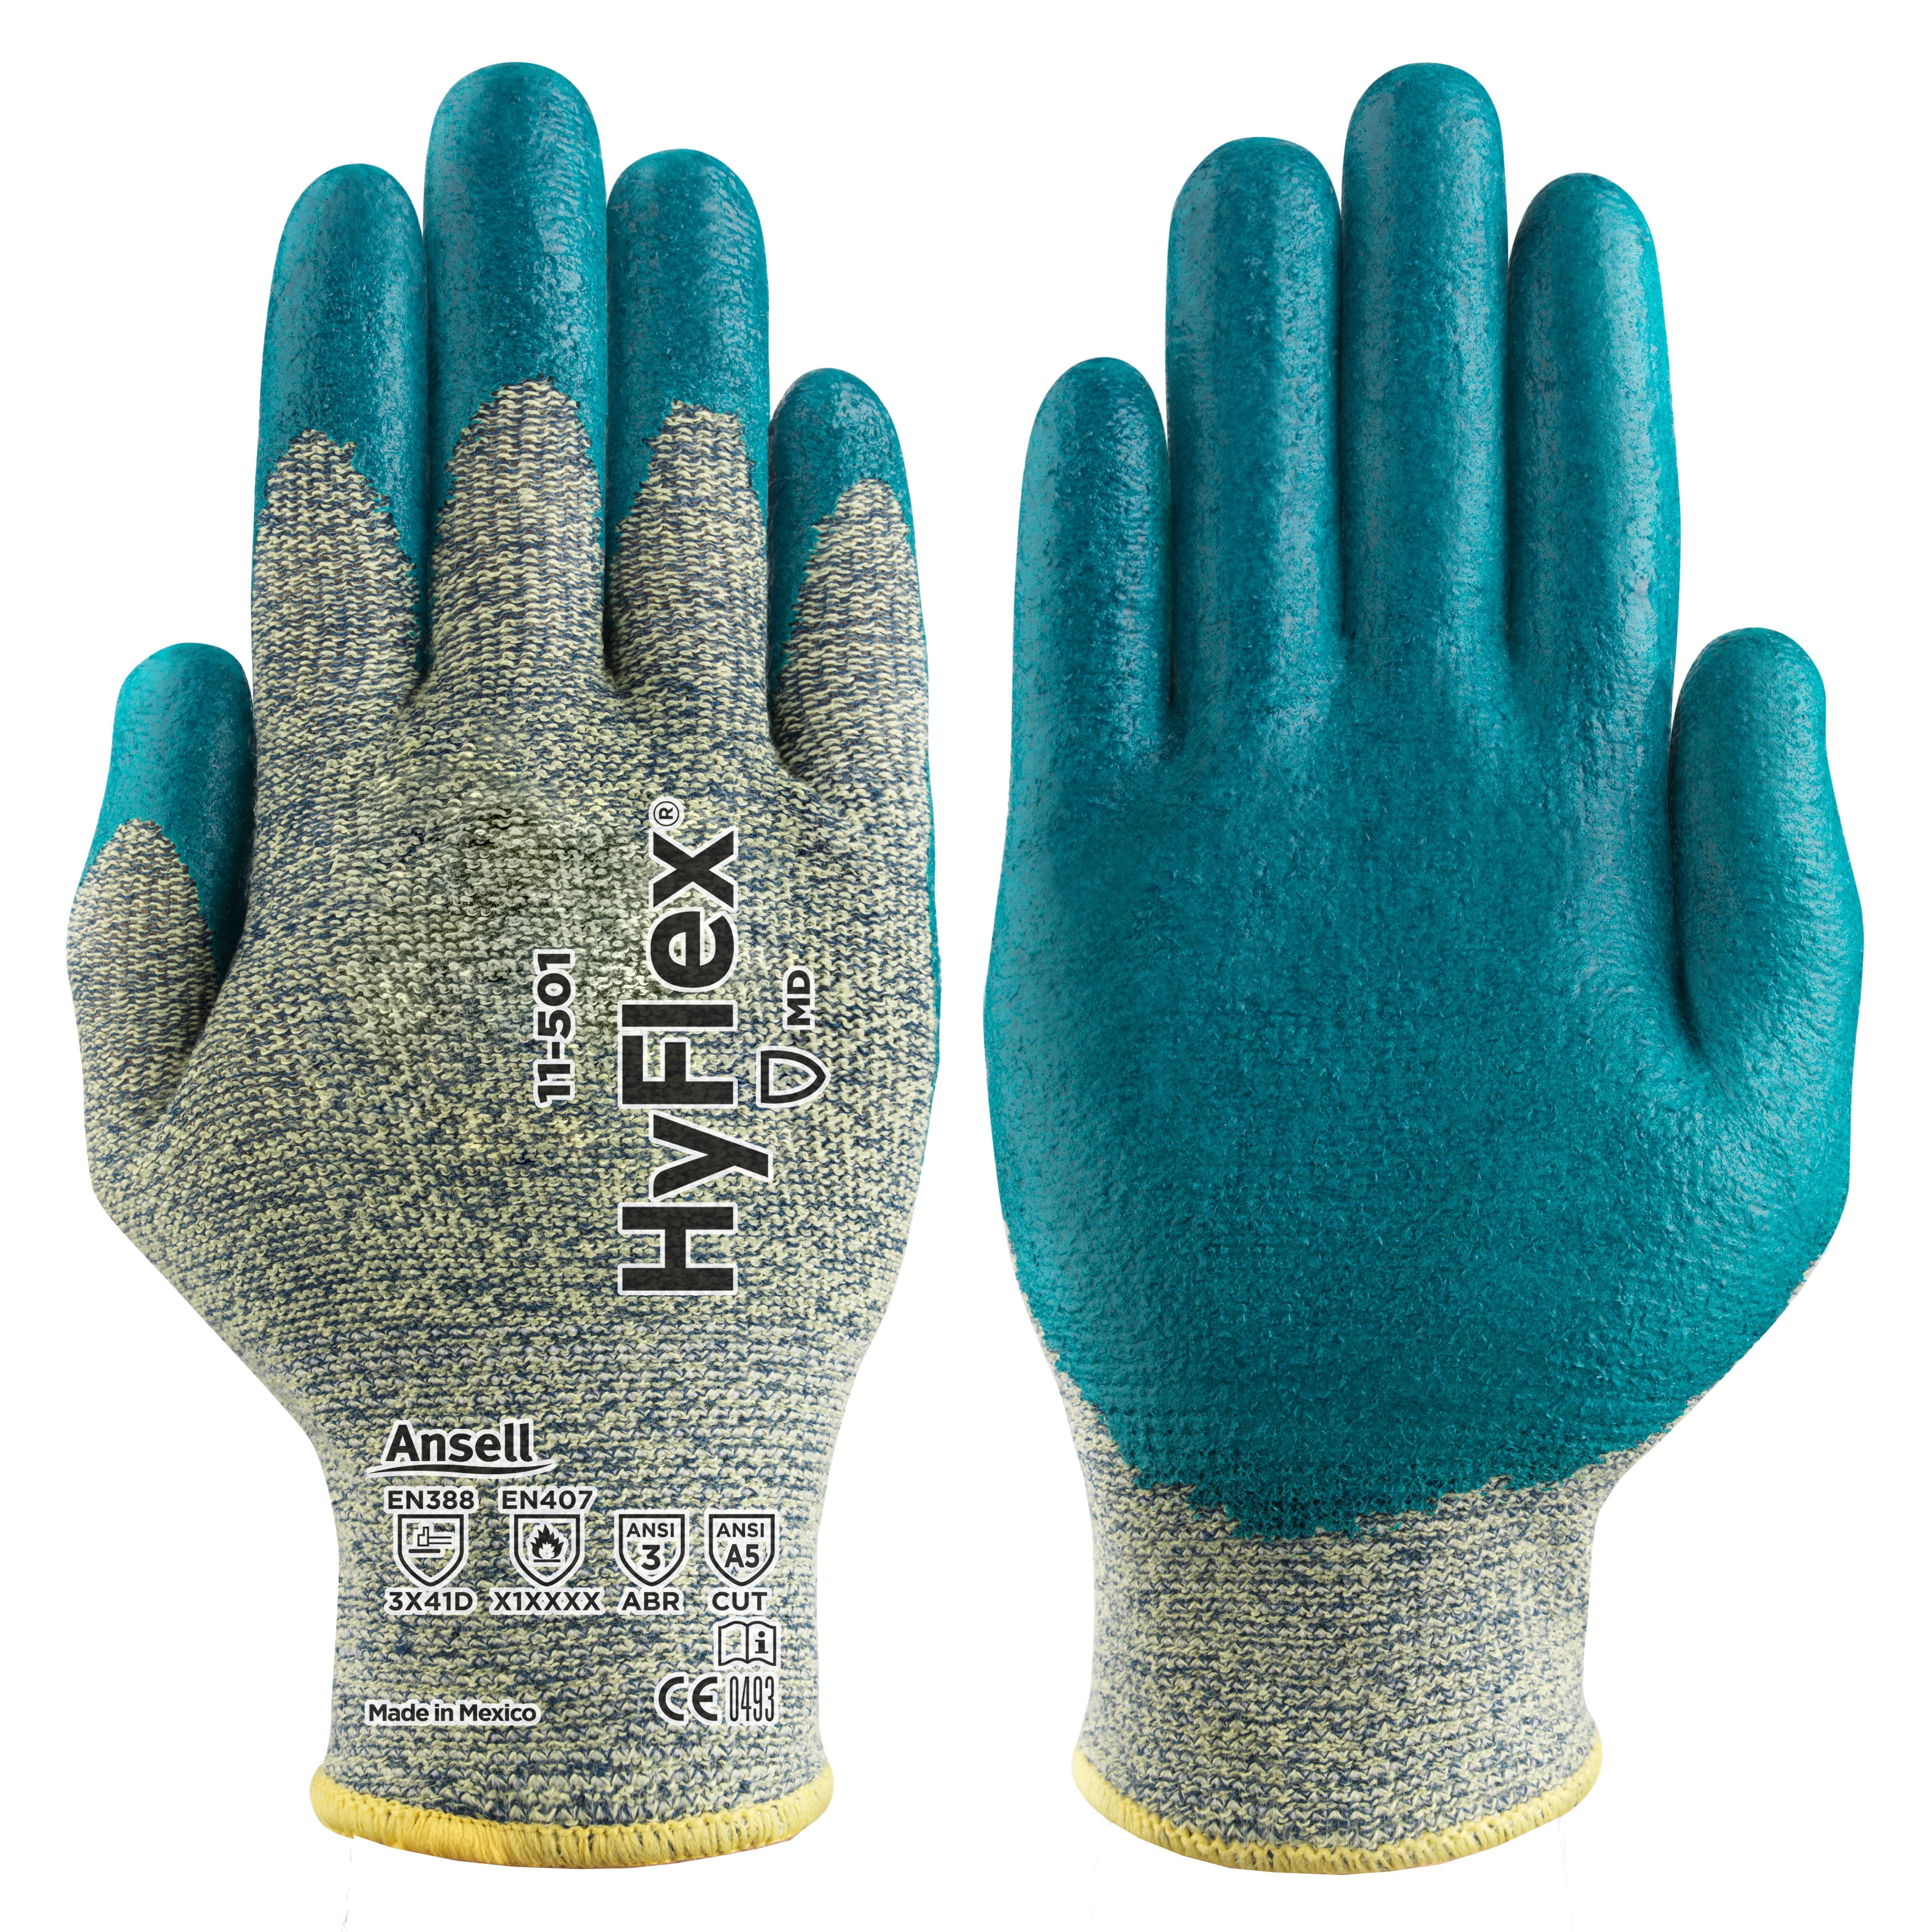 ANSELL HYFLEX 11-501 FOAM NITRILE COATED - Cut Resistant Gloves